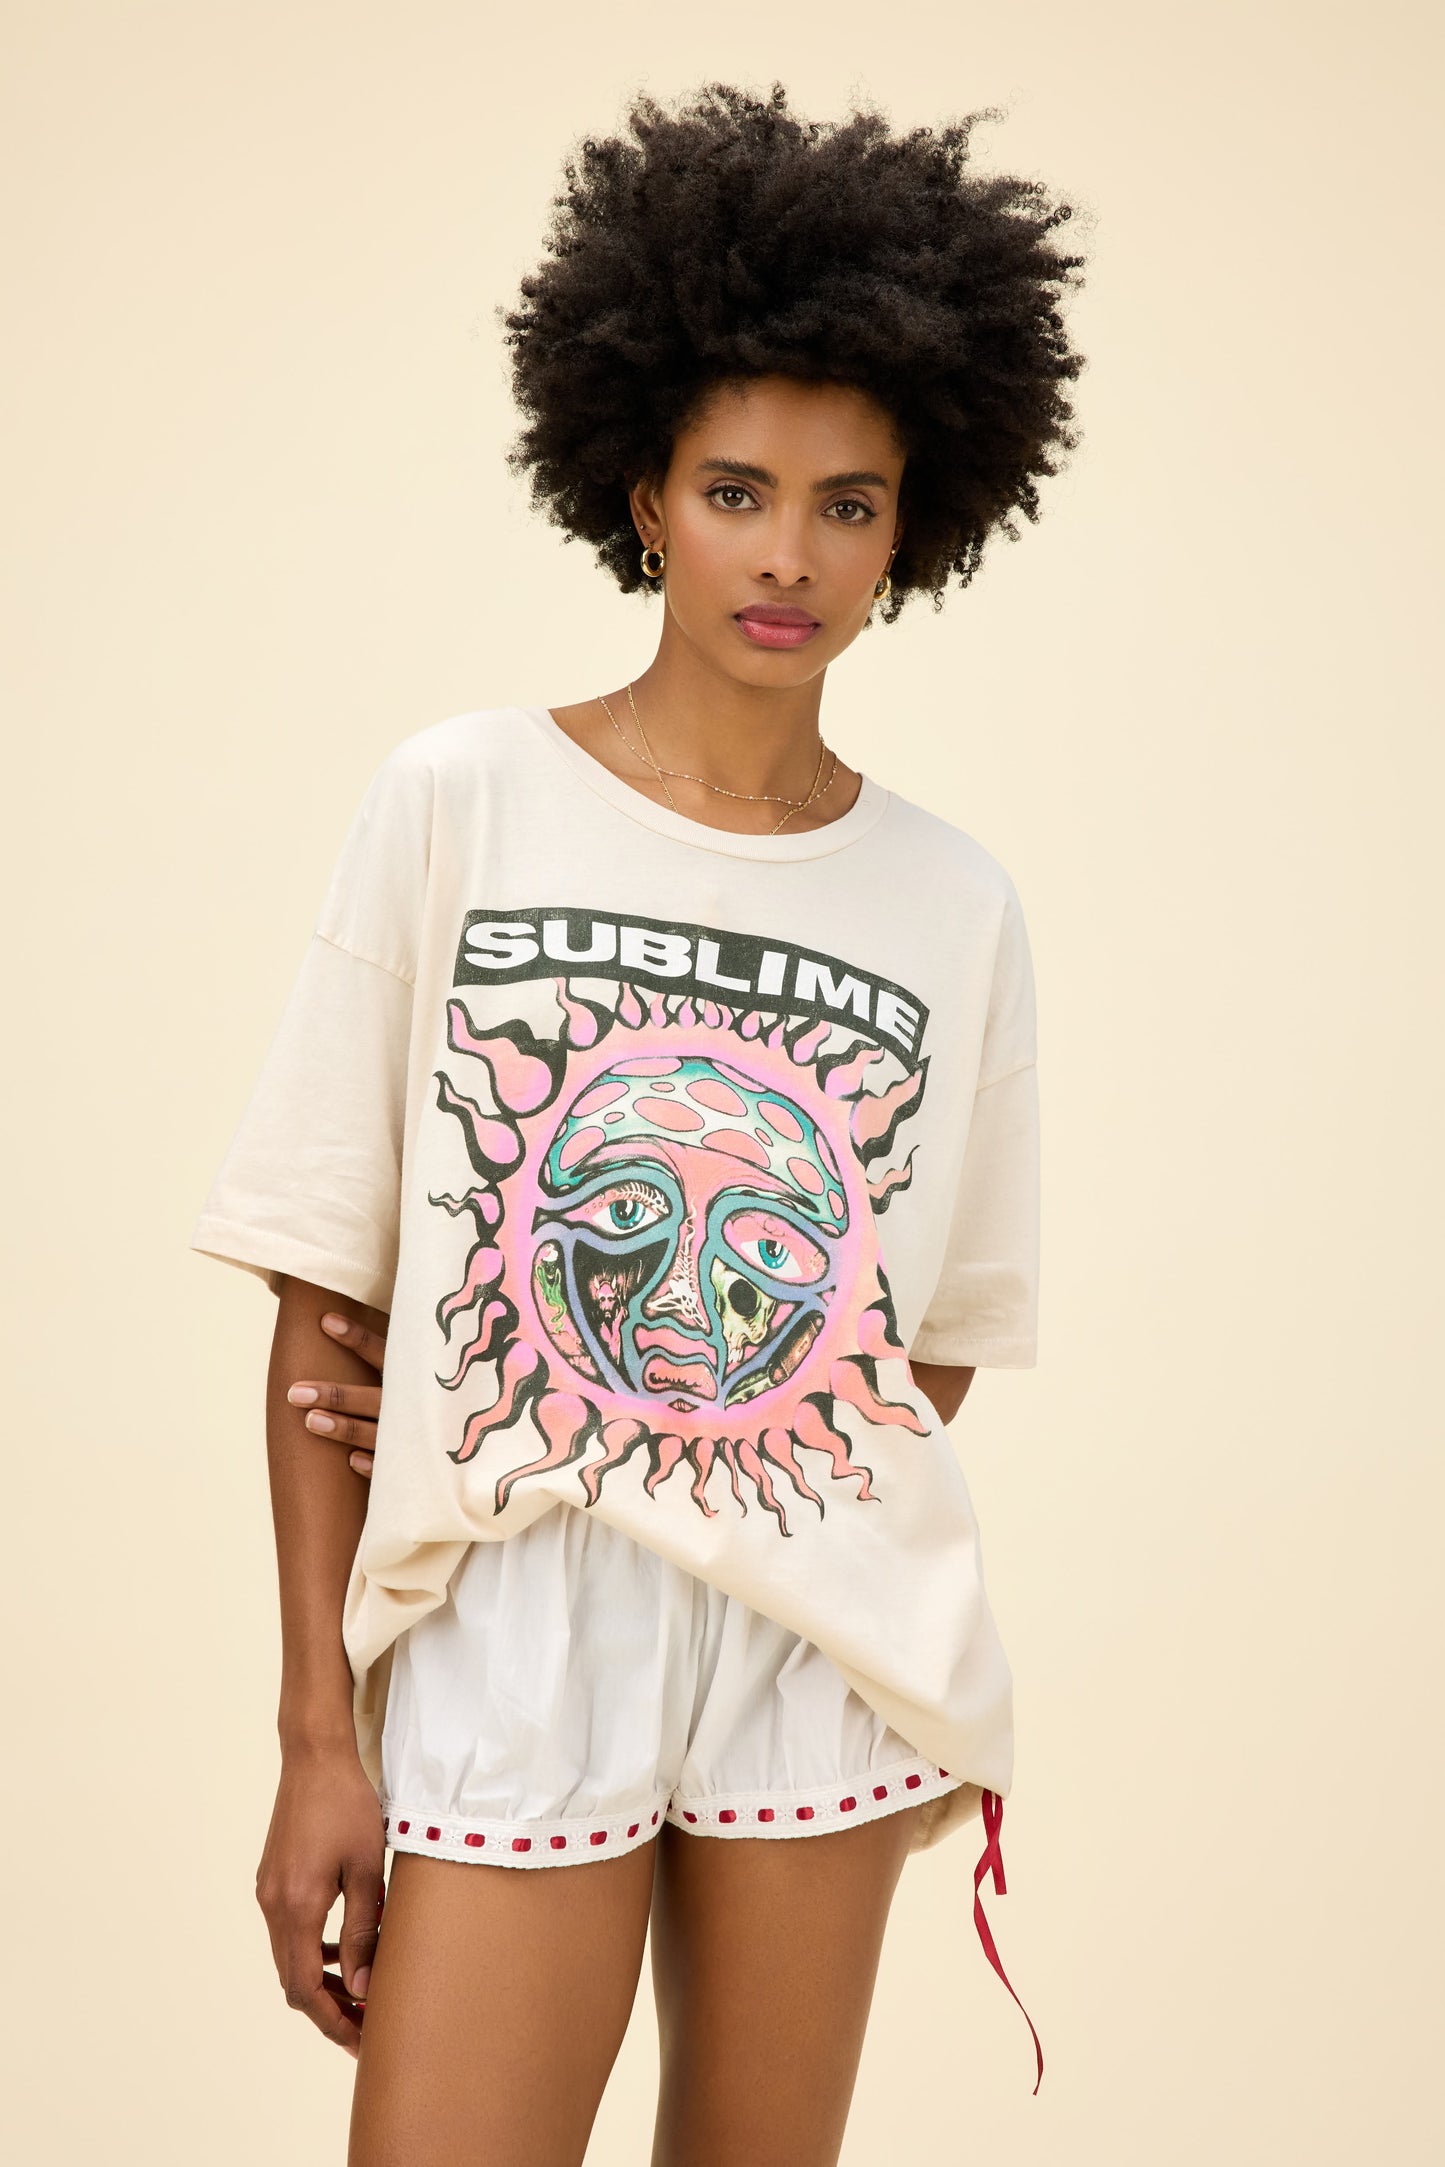 Curly-haired model wearing a roomy fit graphic tee of Sublime's 40 Oz. To Freedom sun album artwork in a dirty white colorway.